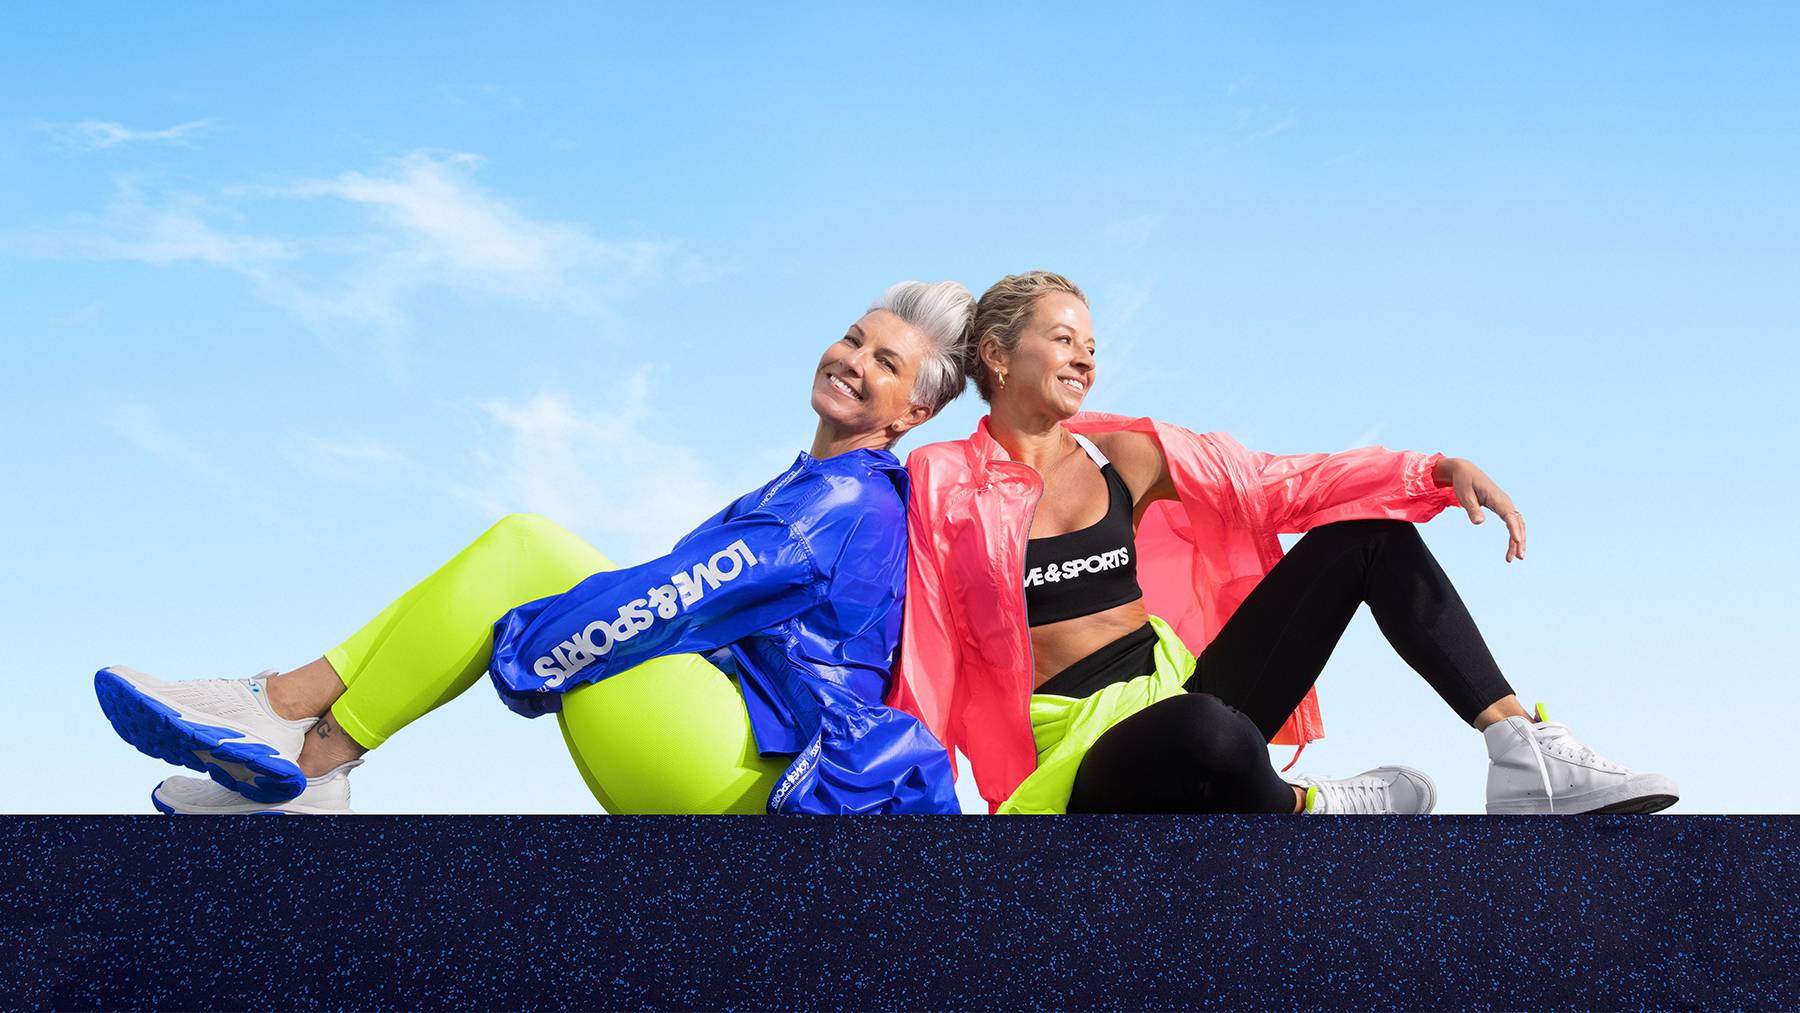 Walmart's new activewear label is being designed by SoulCycle master instructor Stacey Griffith and former Milly designer Michelle Smith.